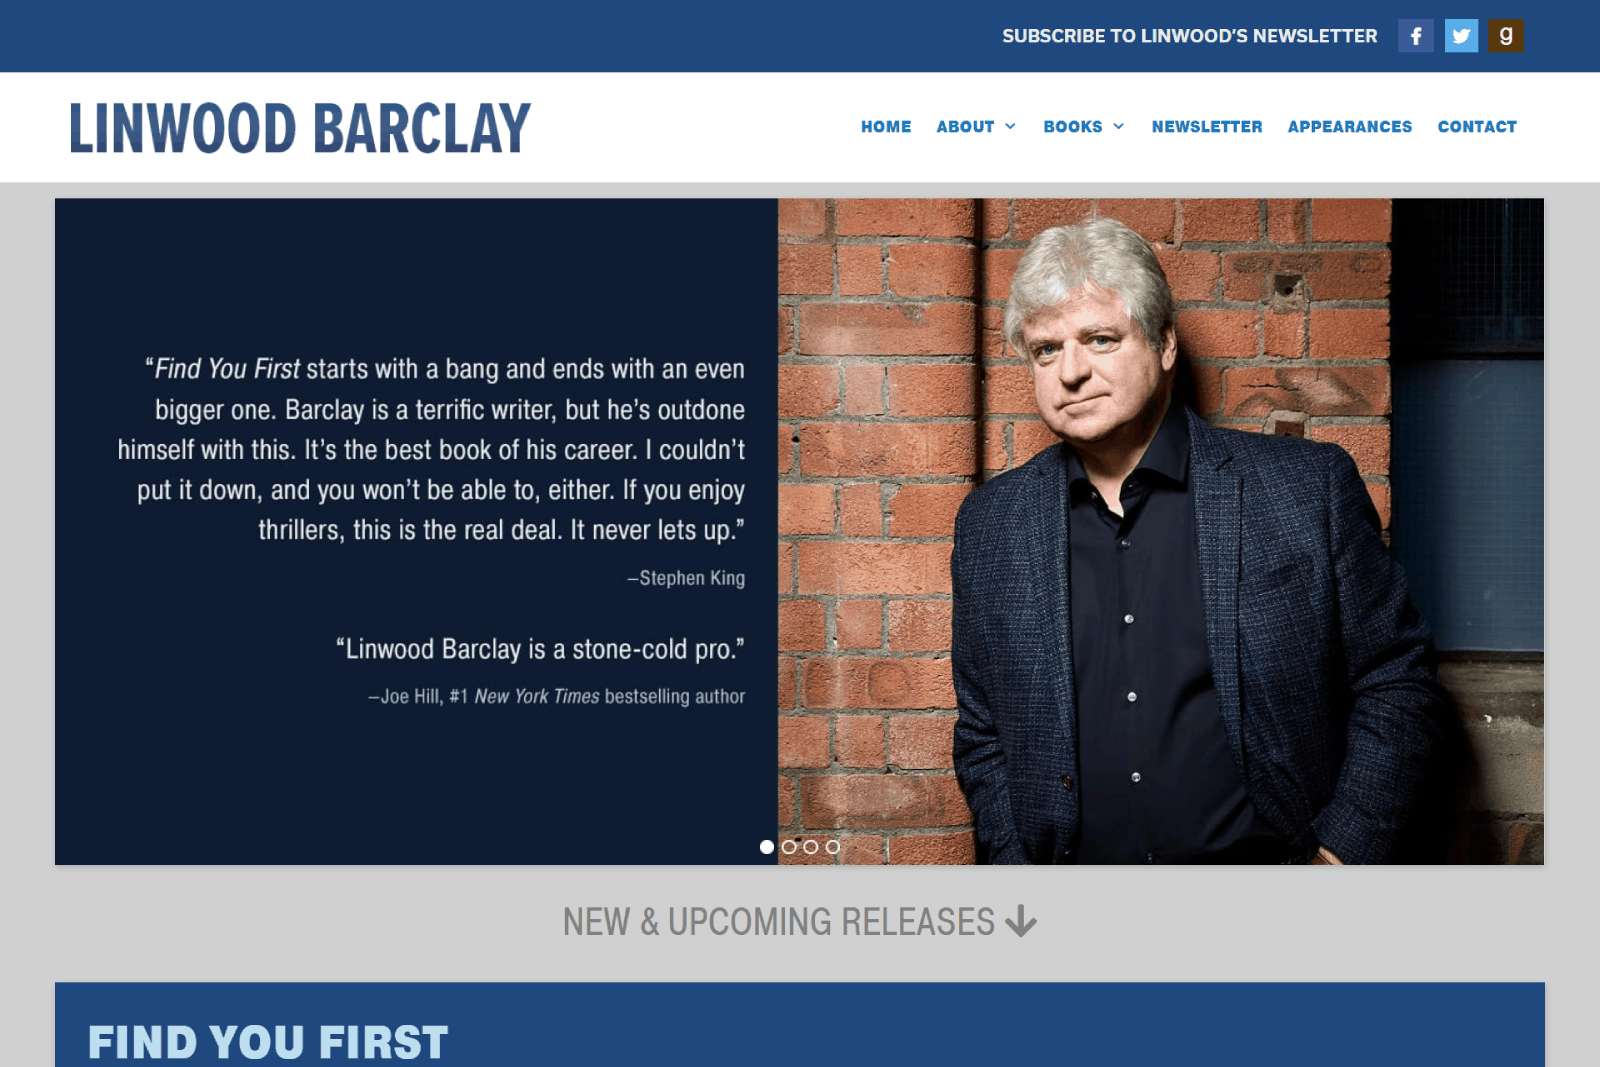 Linwood Barclay 2021 (Find You First)